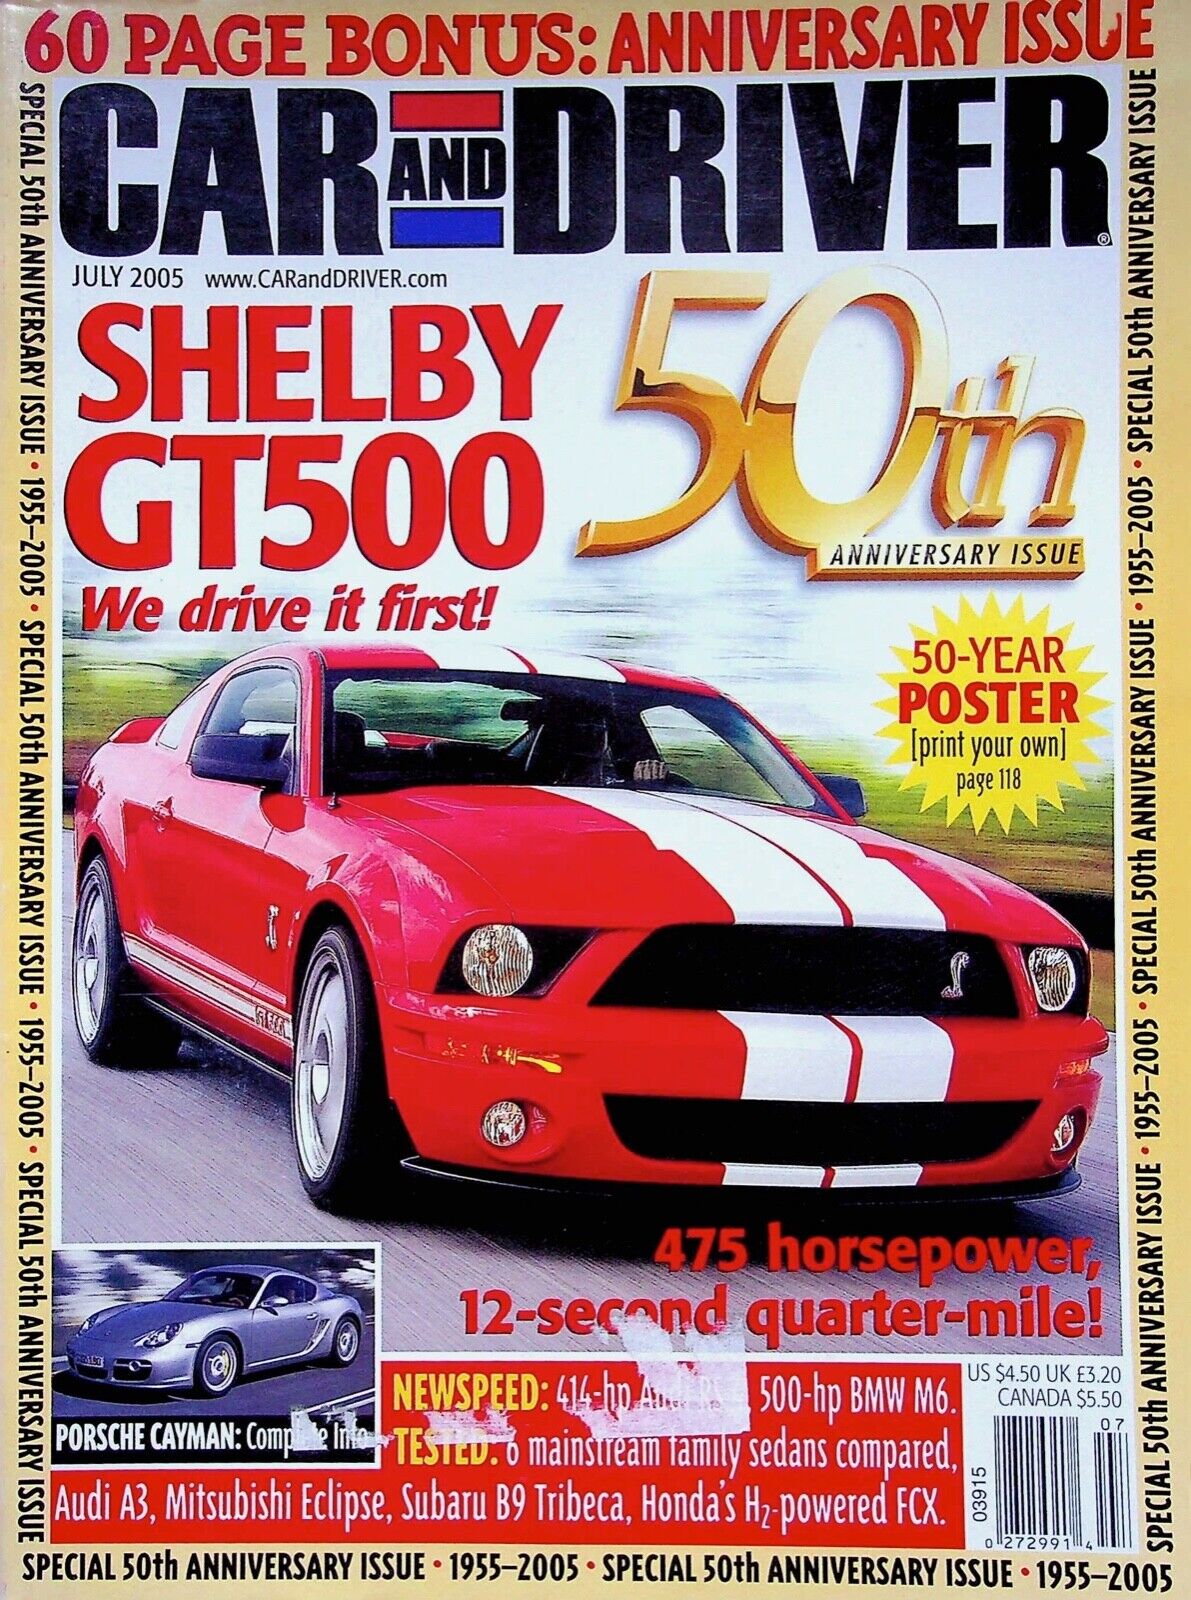 SHELBY GT500  - ROAD AND DRIVER, JULY VOLUME 51, NUMBER 1, 2005 GOOD USED SHAPE